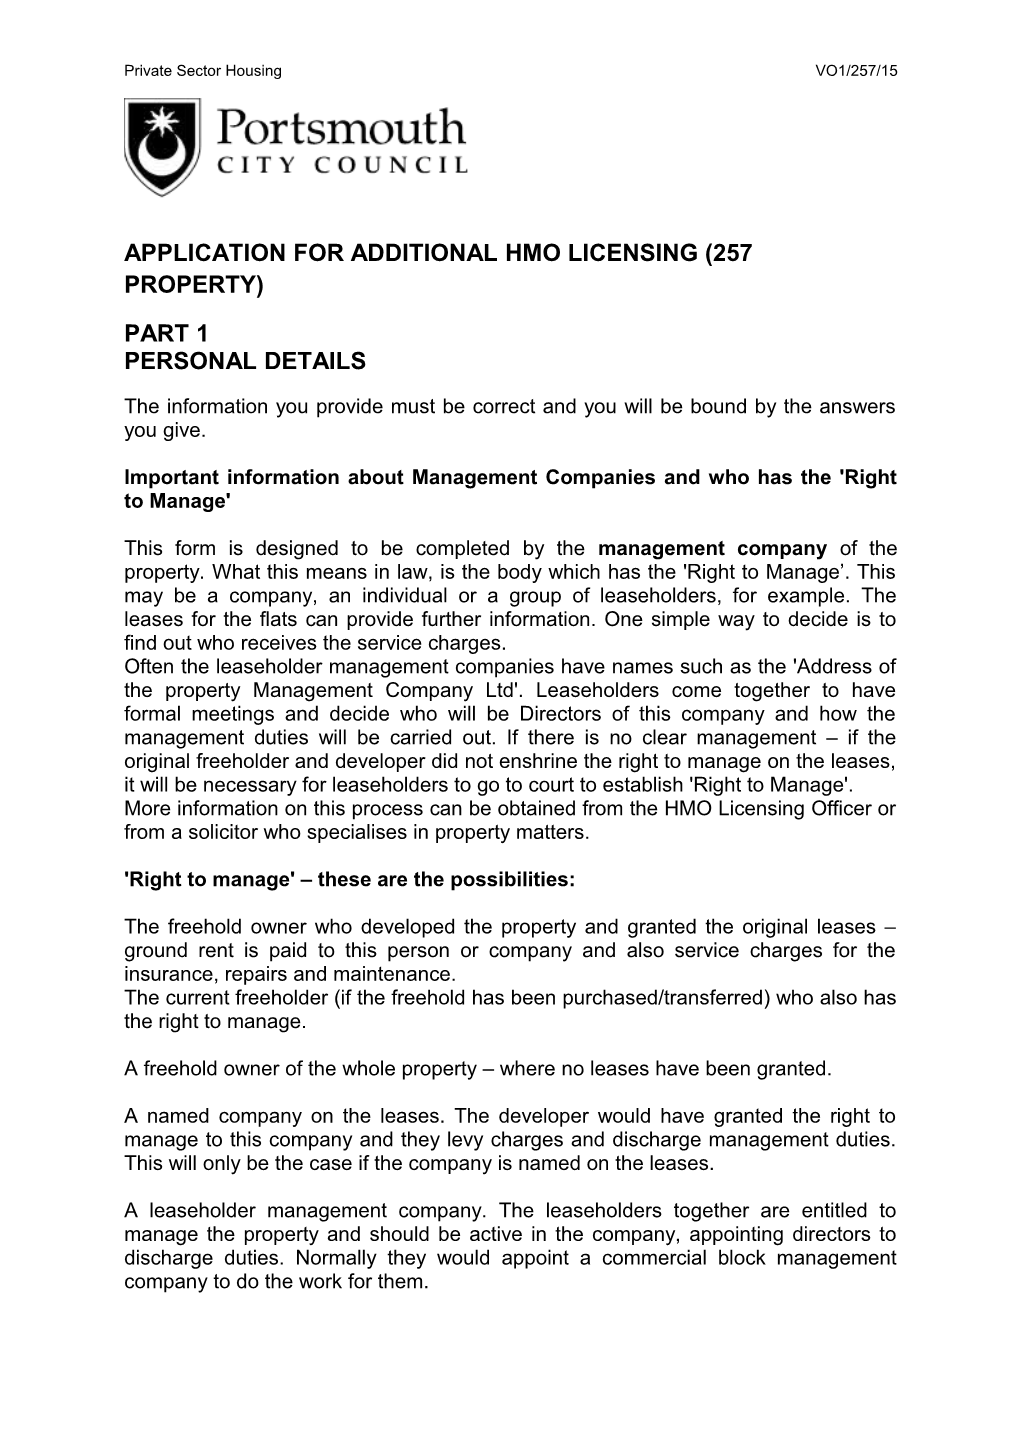 APPLICATION for ADDITIONAL HMO LICENSING (257 Property)